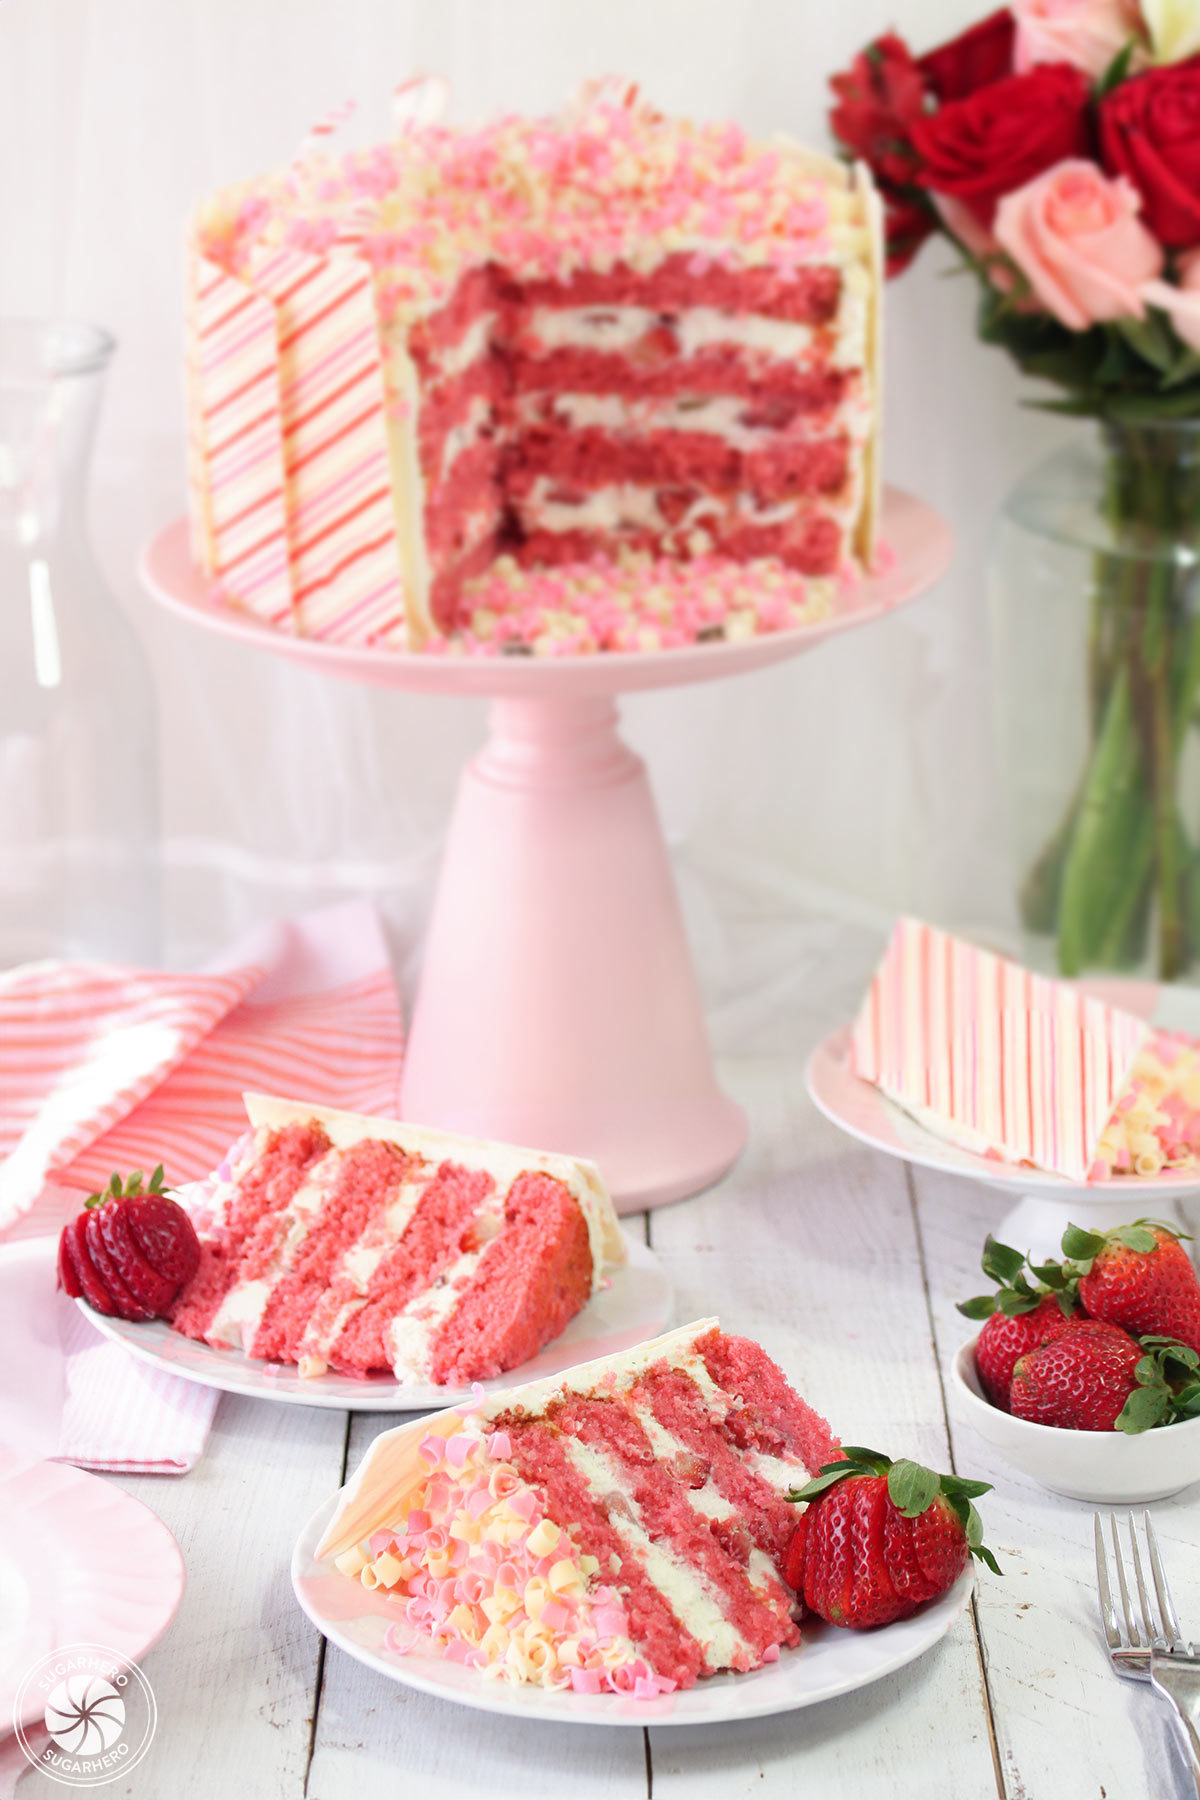 Strawberries and Cream Layer Cake - vertical image of cake on a pink cake stand, with several pieces of cake on plates around the base | From SugarHero.com